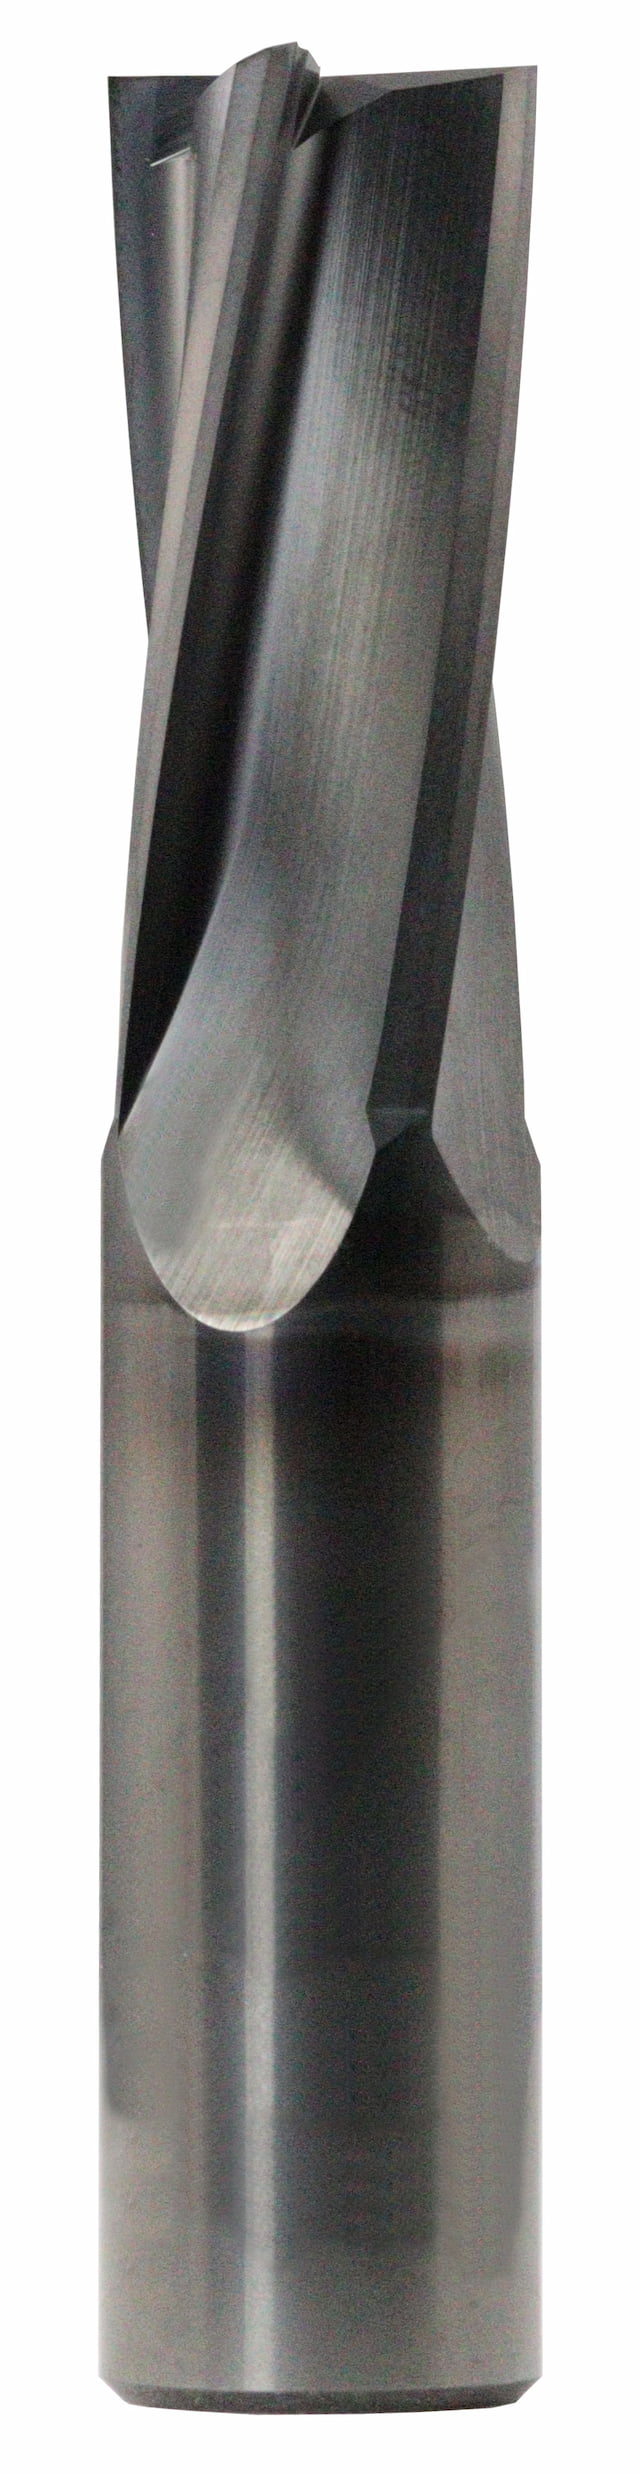 6.00mm Dia, 4 Flute, Square End End Mill - 83057